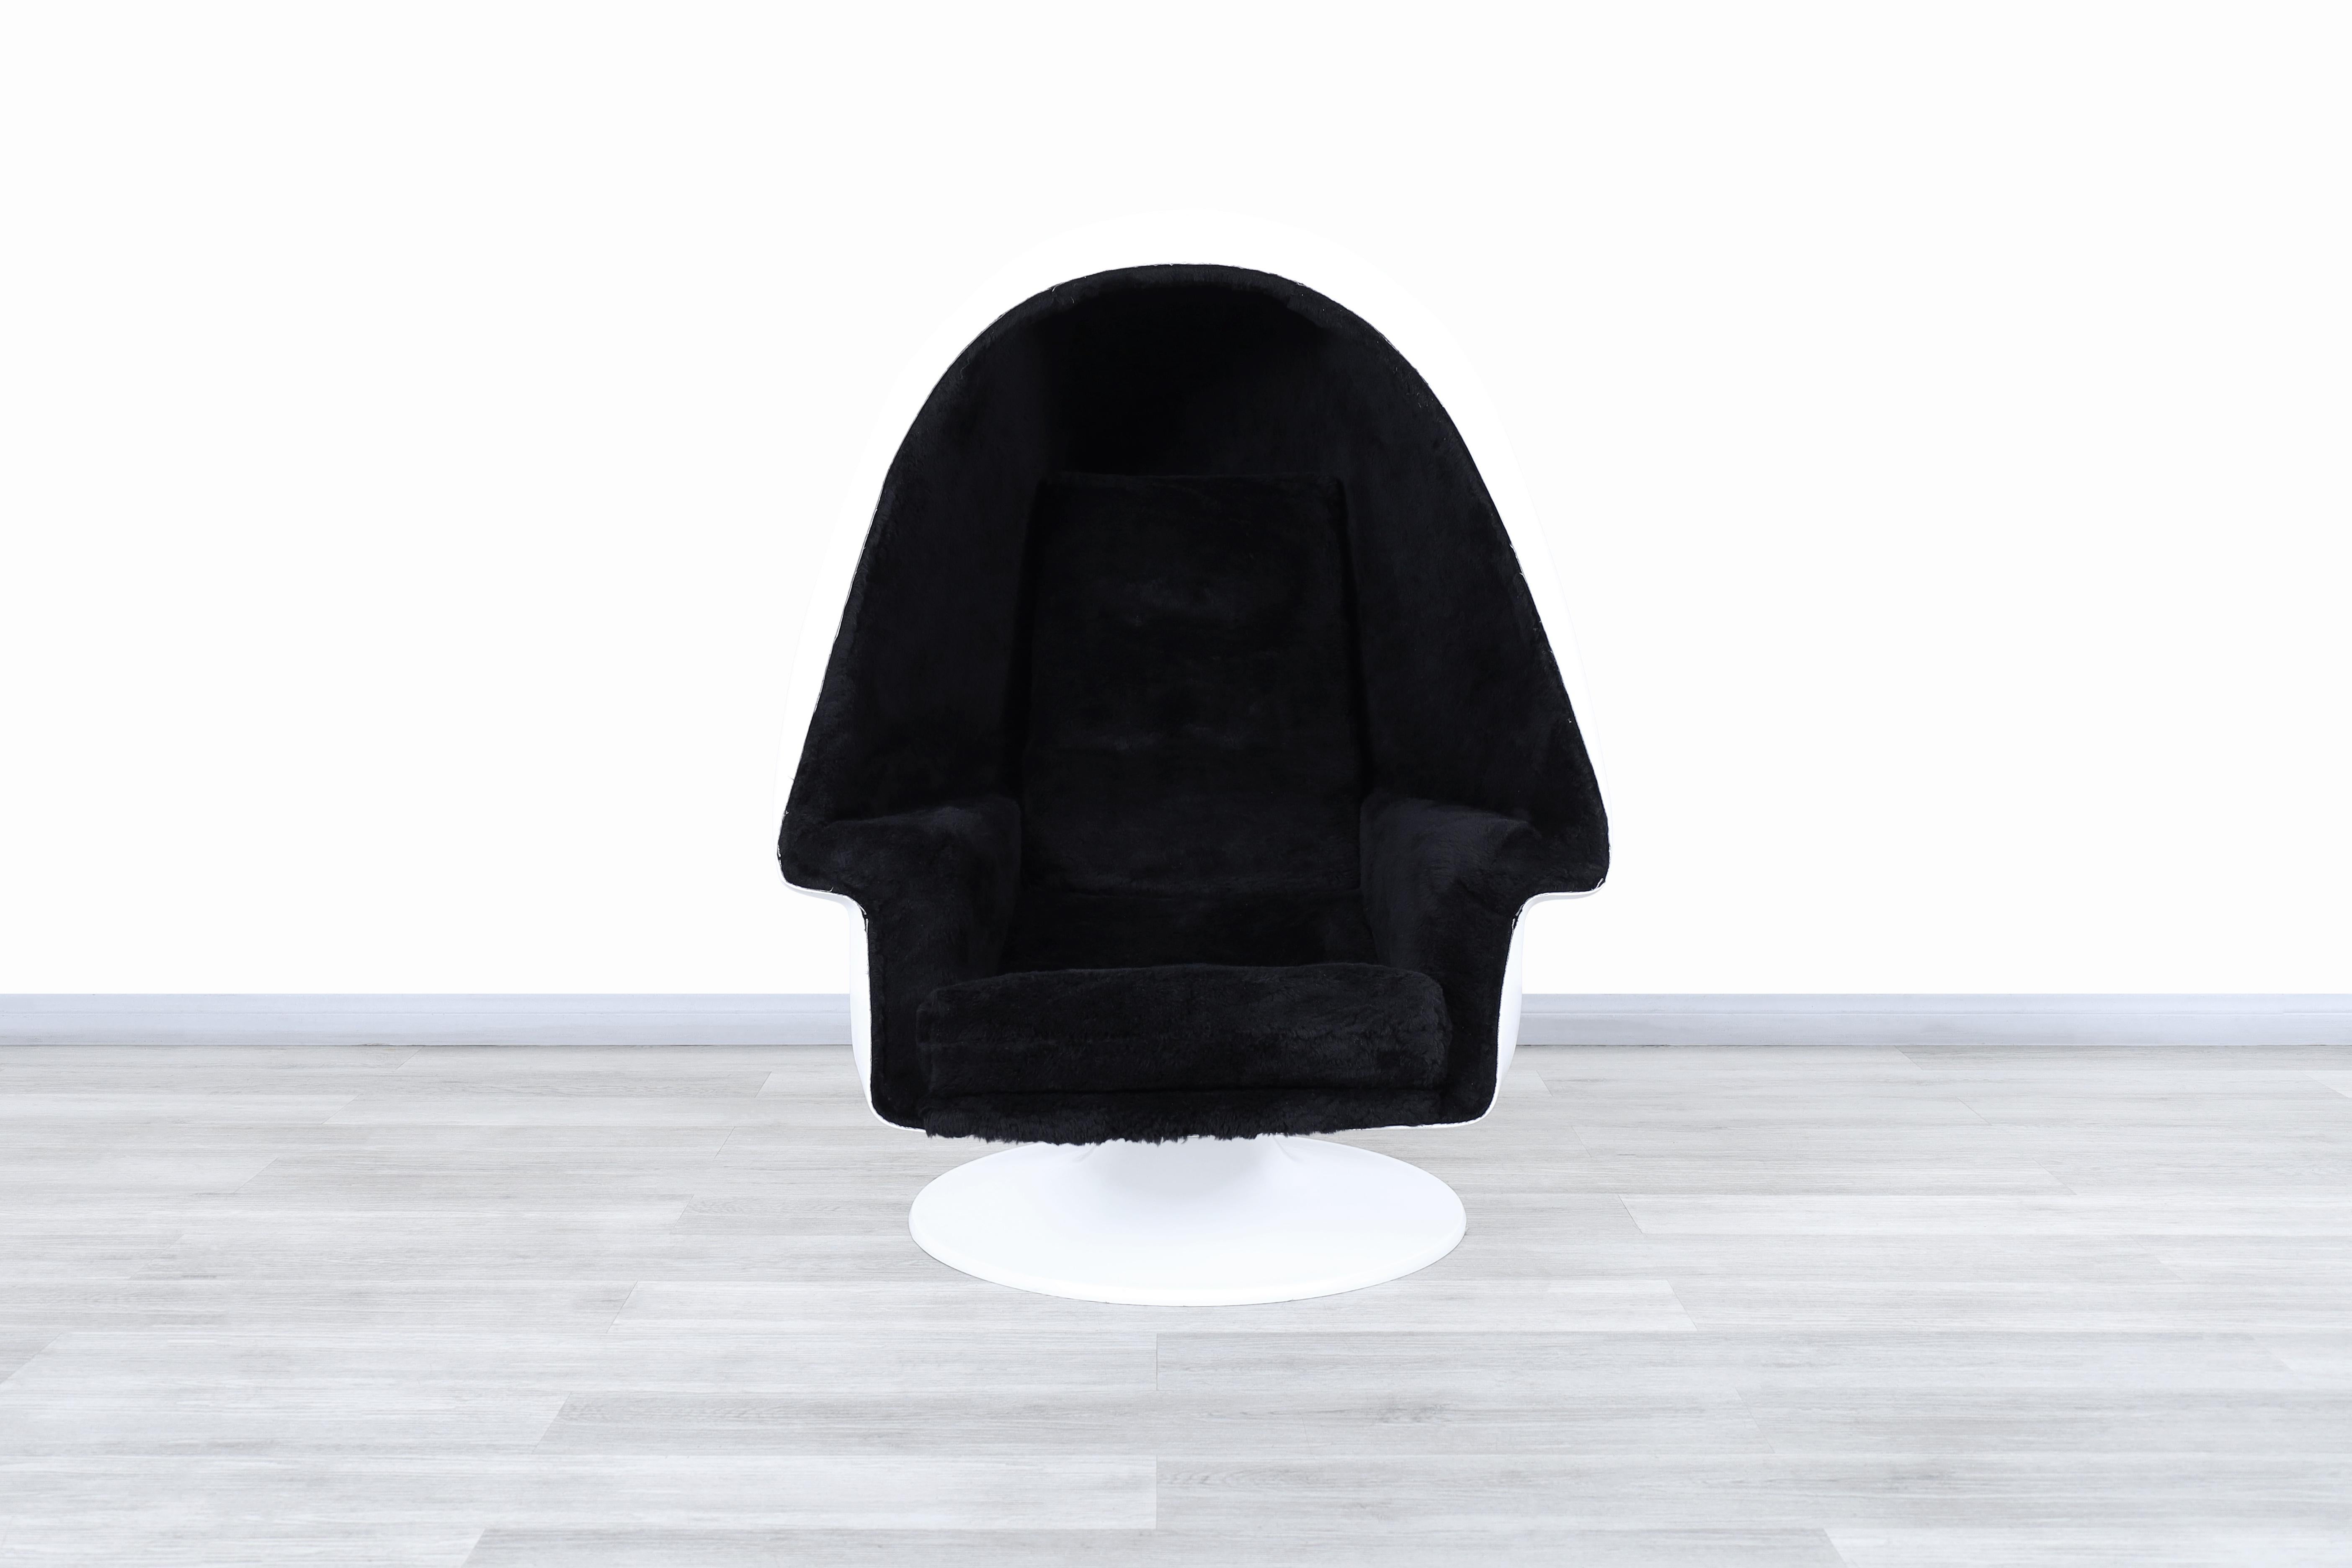 Stunning American space age fiberglass “Egg” swivel chair designed and manufactured in the United States, circa 1970s. This chair has a seductive design that draws attention to the eyes of any viewer and generates a desire to sit on it. It features